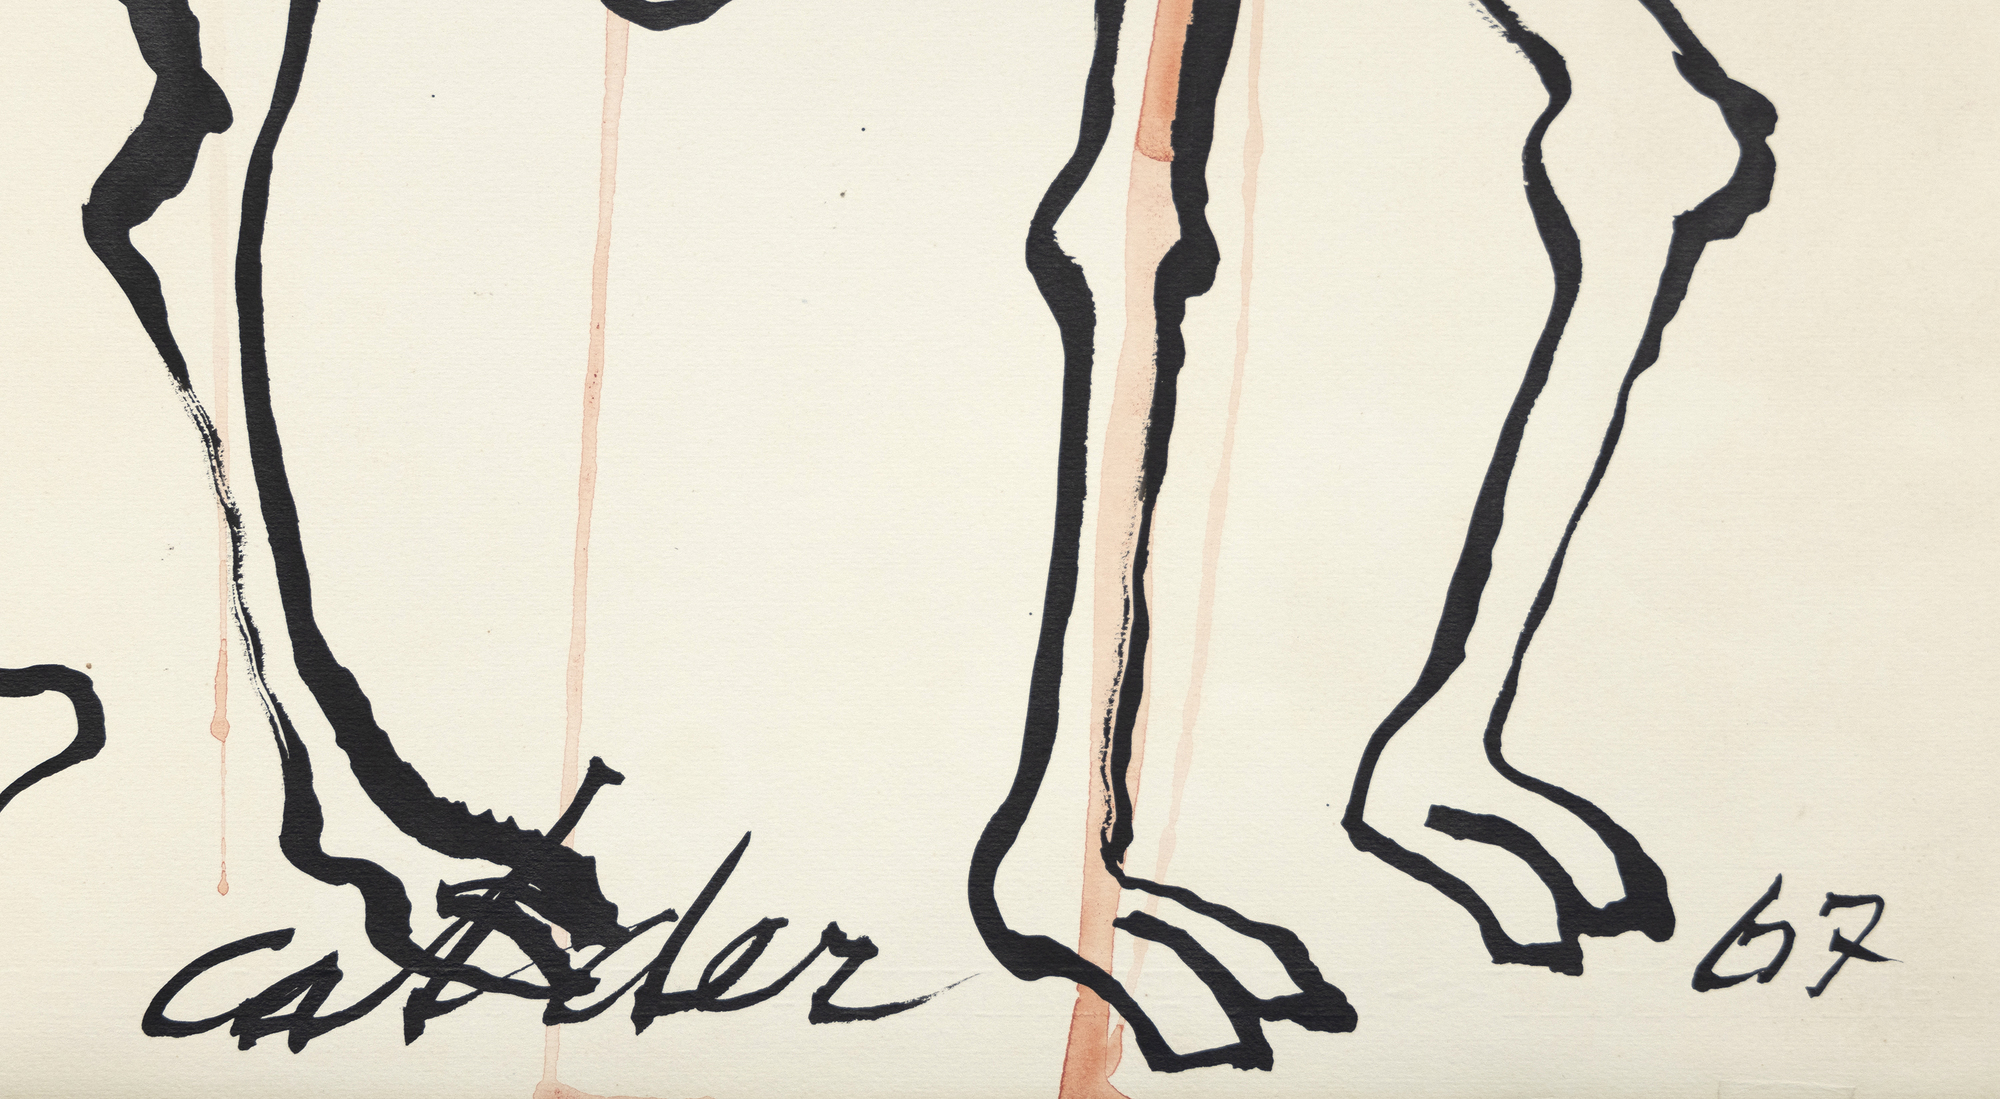 Well known for his candor and pragmatic sensibility, Alexander Calder was as direct, ingenious, and straight to the point in life as he was in his art. “Personnages”, for example, is unabashedly dynamic, a work that recalls his early love of the action of the circus as well as his insights into human nature. The character of “Personnages” suggests a spontaneous drawing-in-space, recalling his radical wire sculptures of the 1920s.<br>© 2023 Calder Foundation, New York / Artists Rights Society (ARS), New York